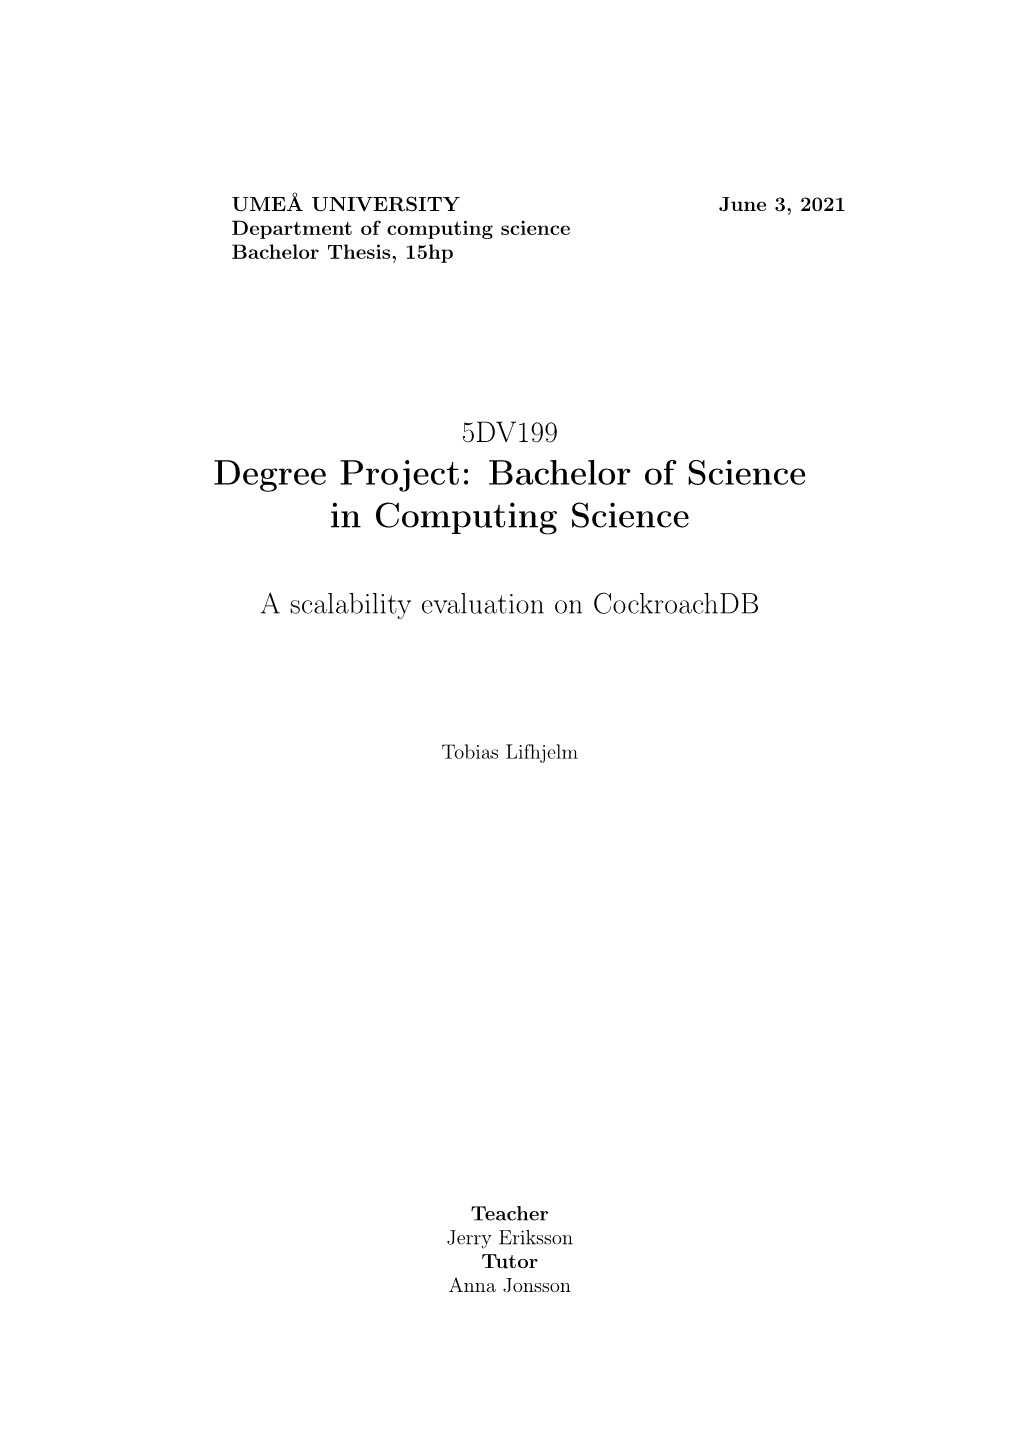 Degree Project: Bachelor of Science in Computing Science